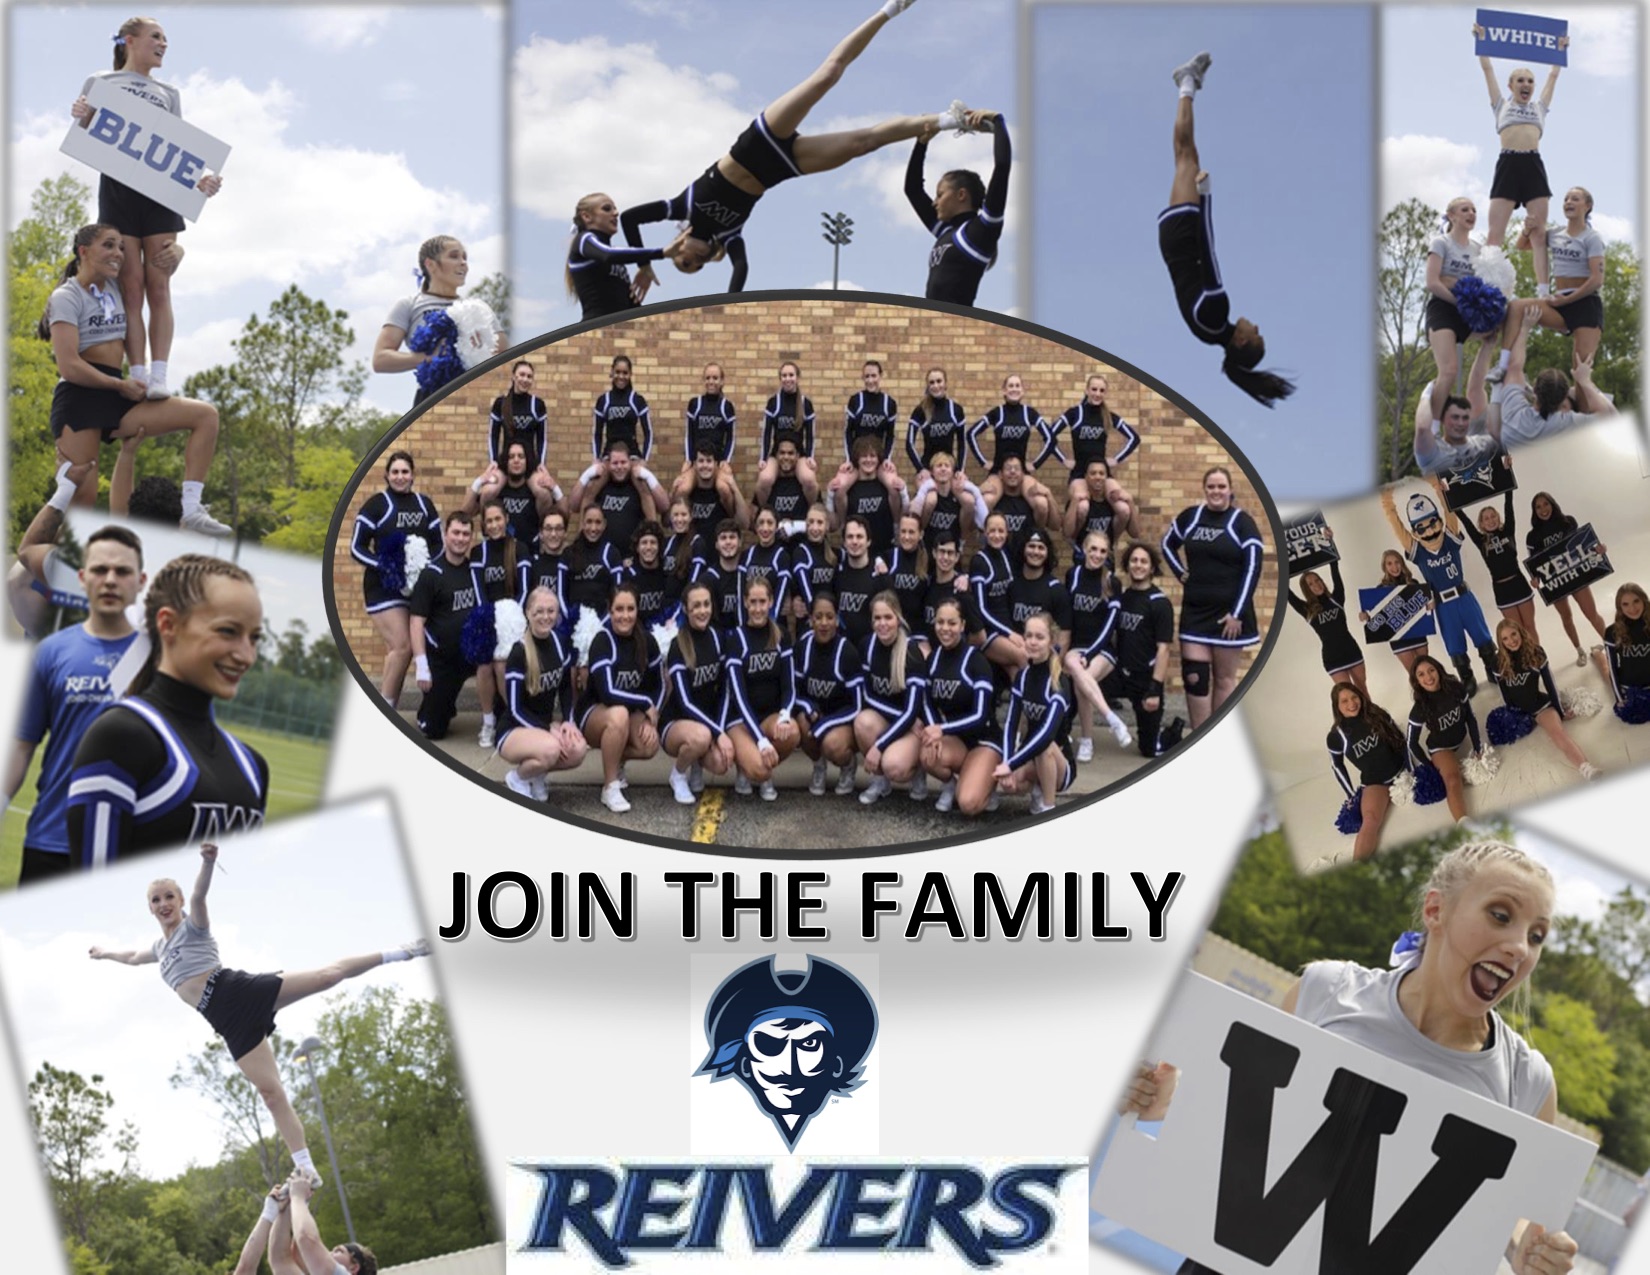 Set your sails towards the Reiver Family!